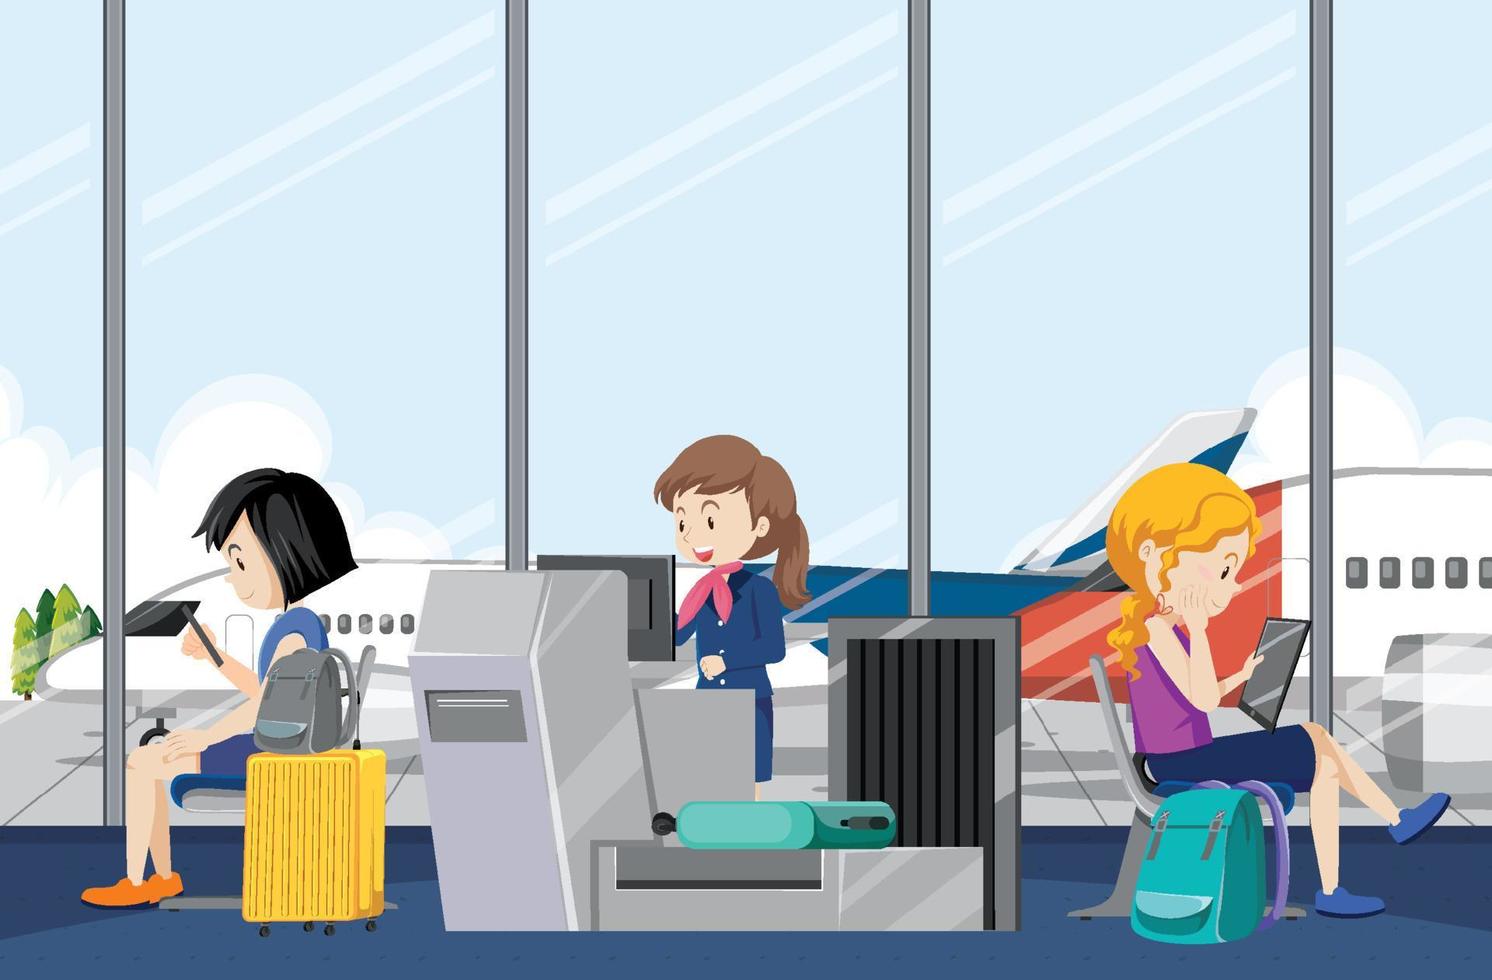 Passengers waiting at a departure gate scene vector